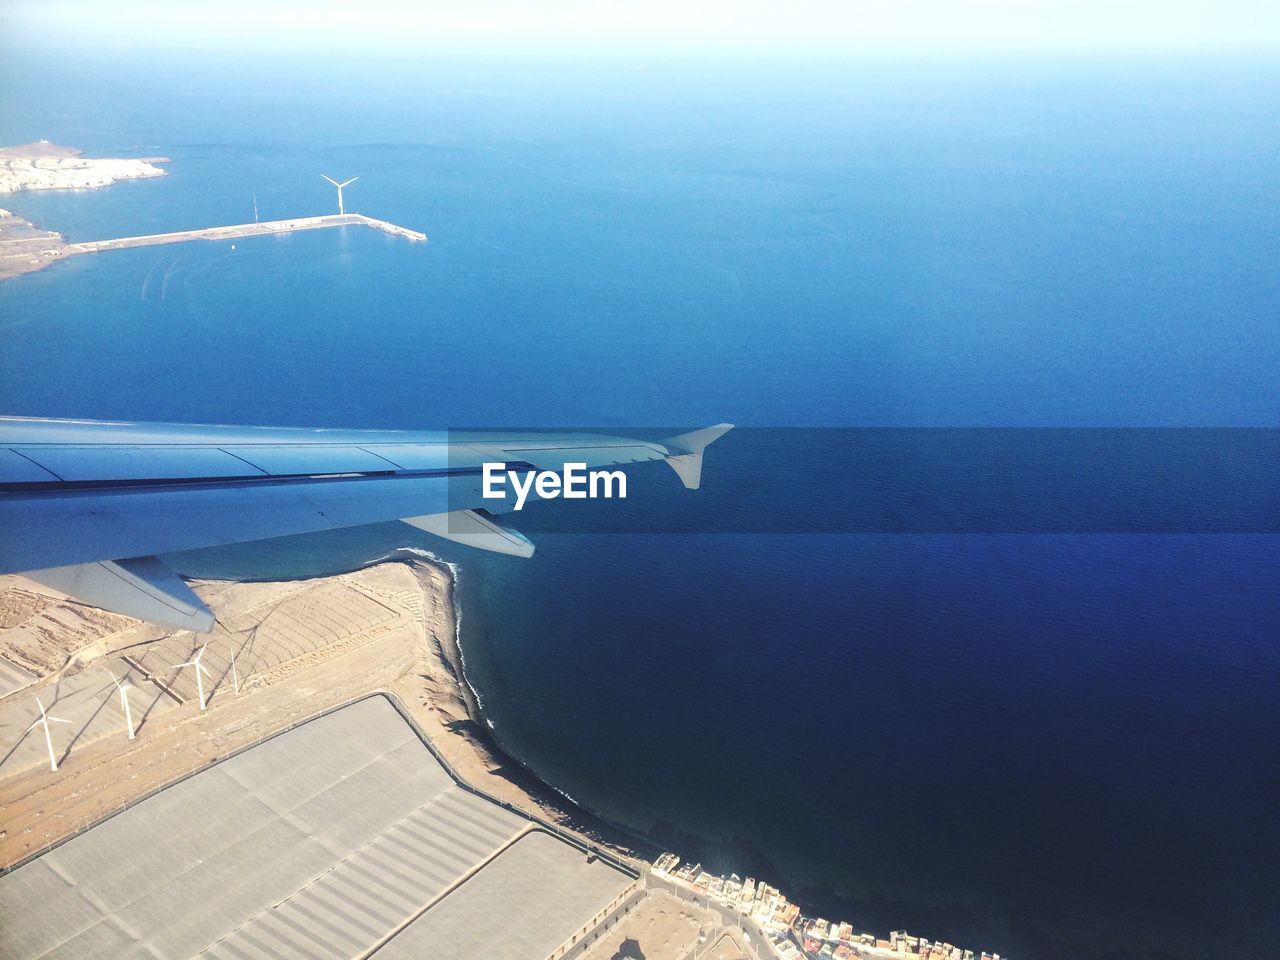 Cropped image of airplane flying above sea and landscape